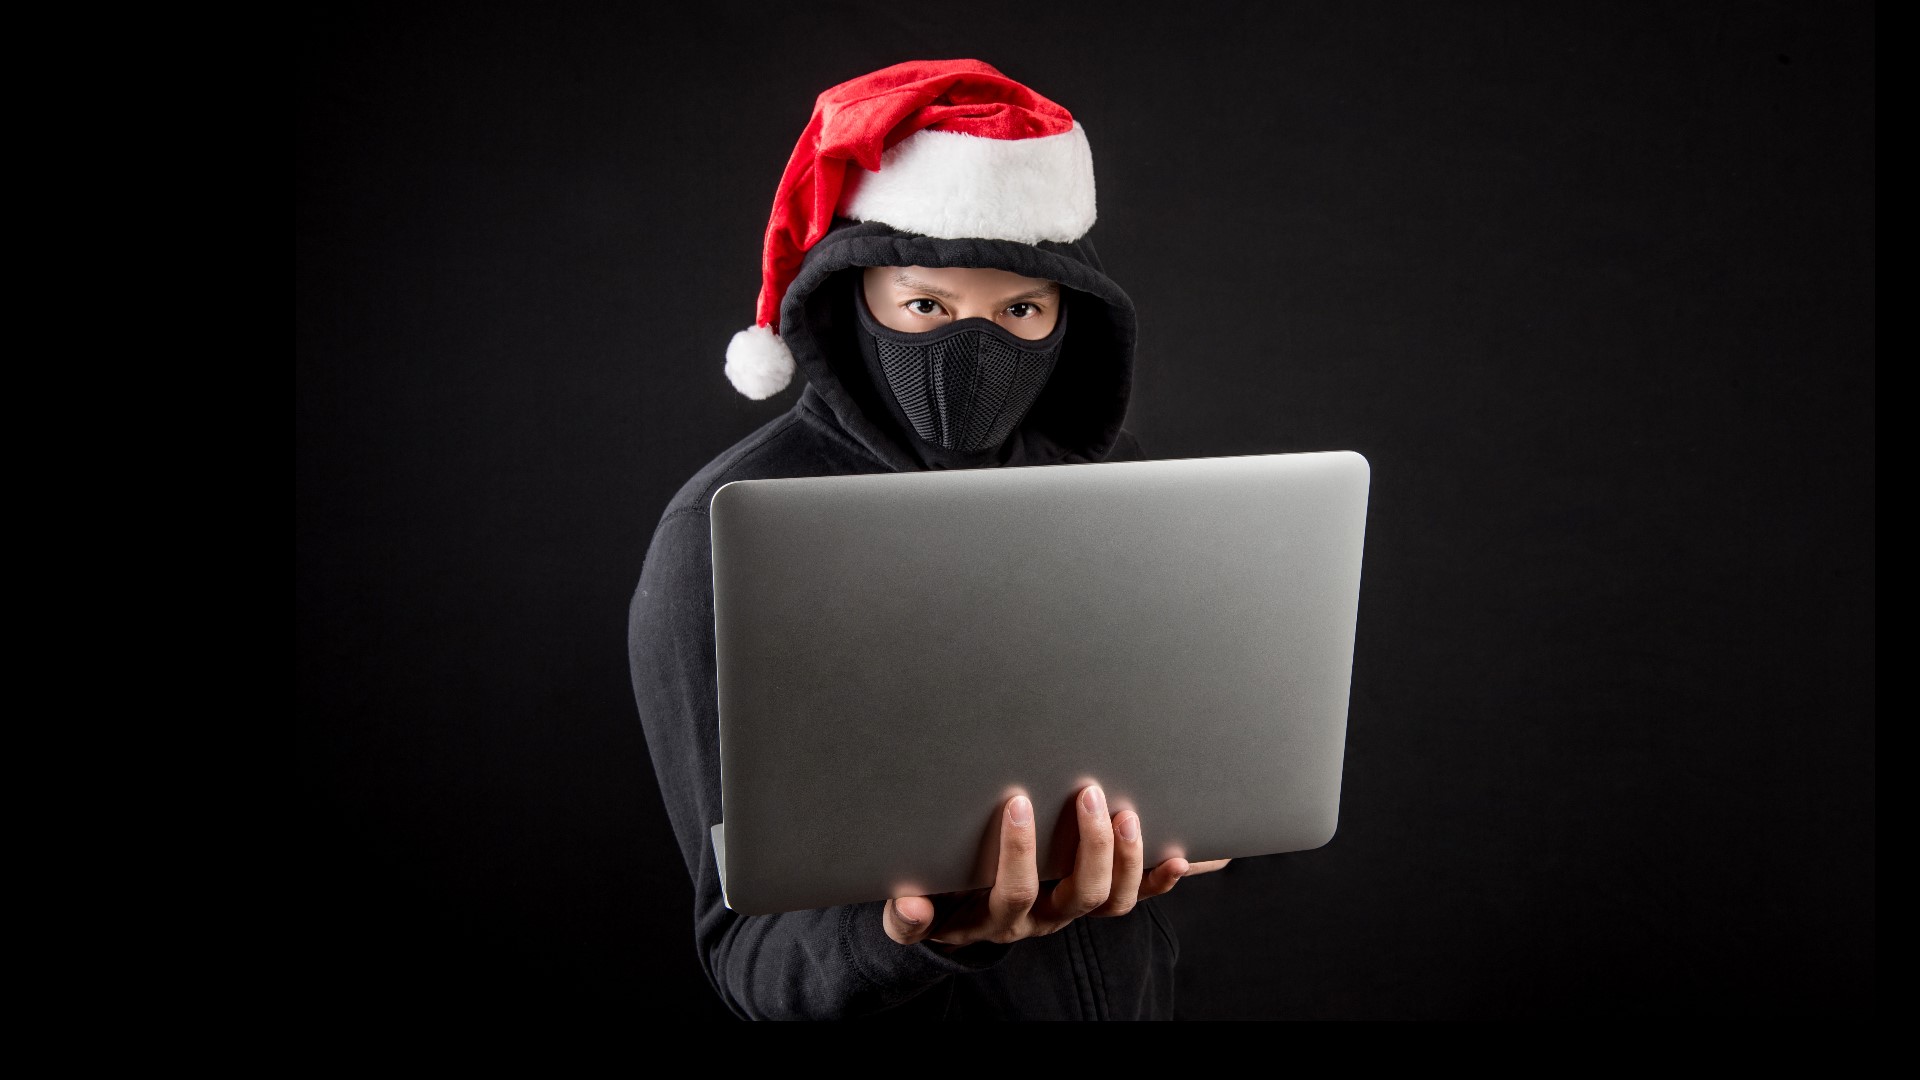 While more people may be willing to give during the holiday season, online scammers plan to prey on that kindness.